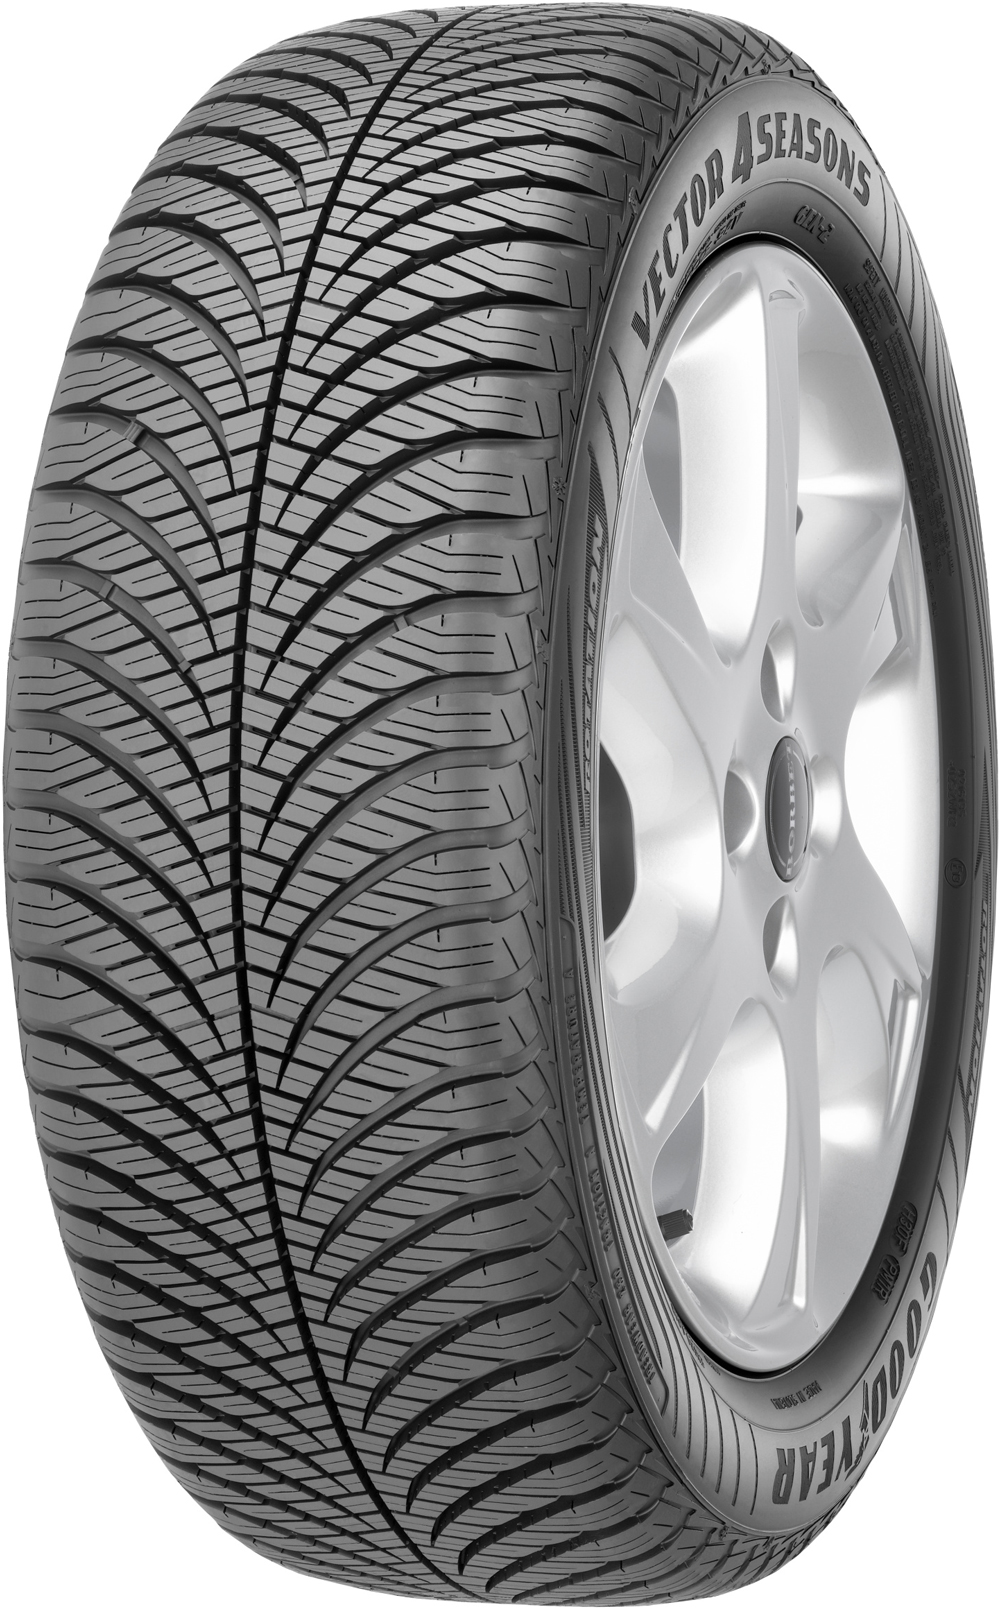 Anvelope auto GOODYEAR VECT4SG2RE 185/60 R15 84T